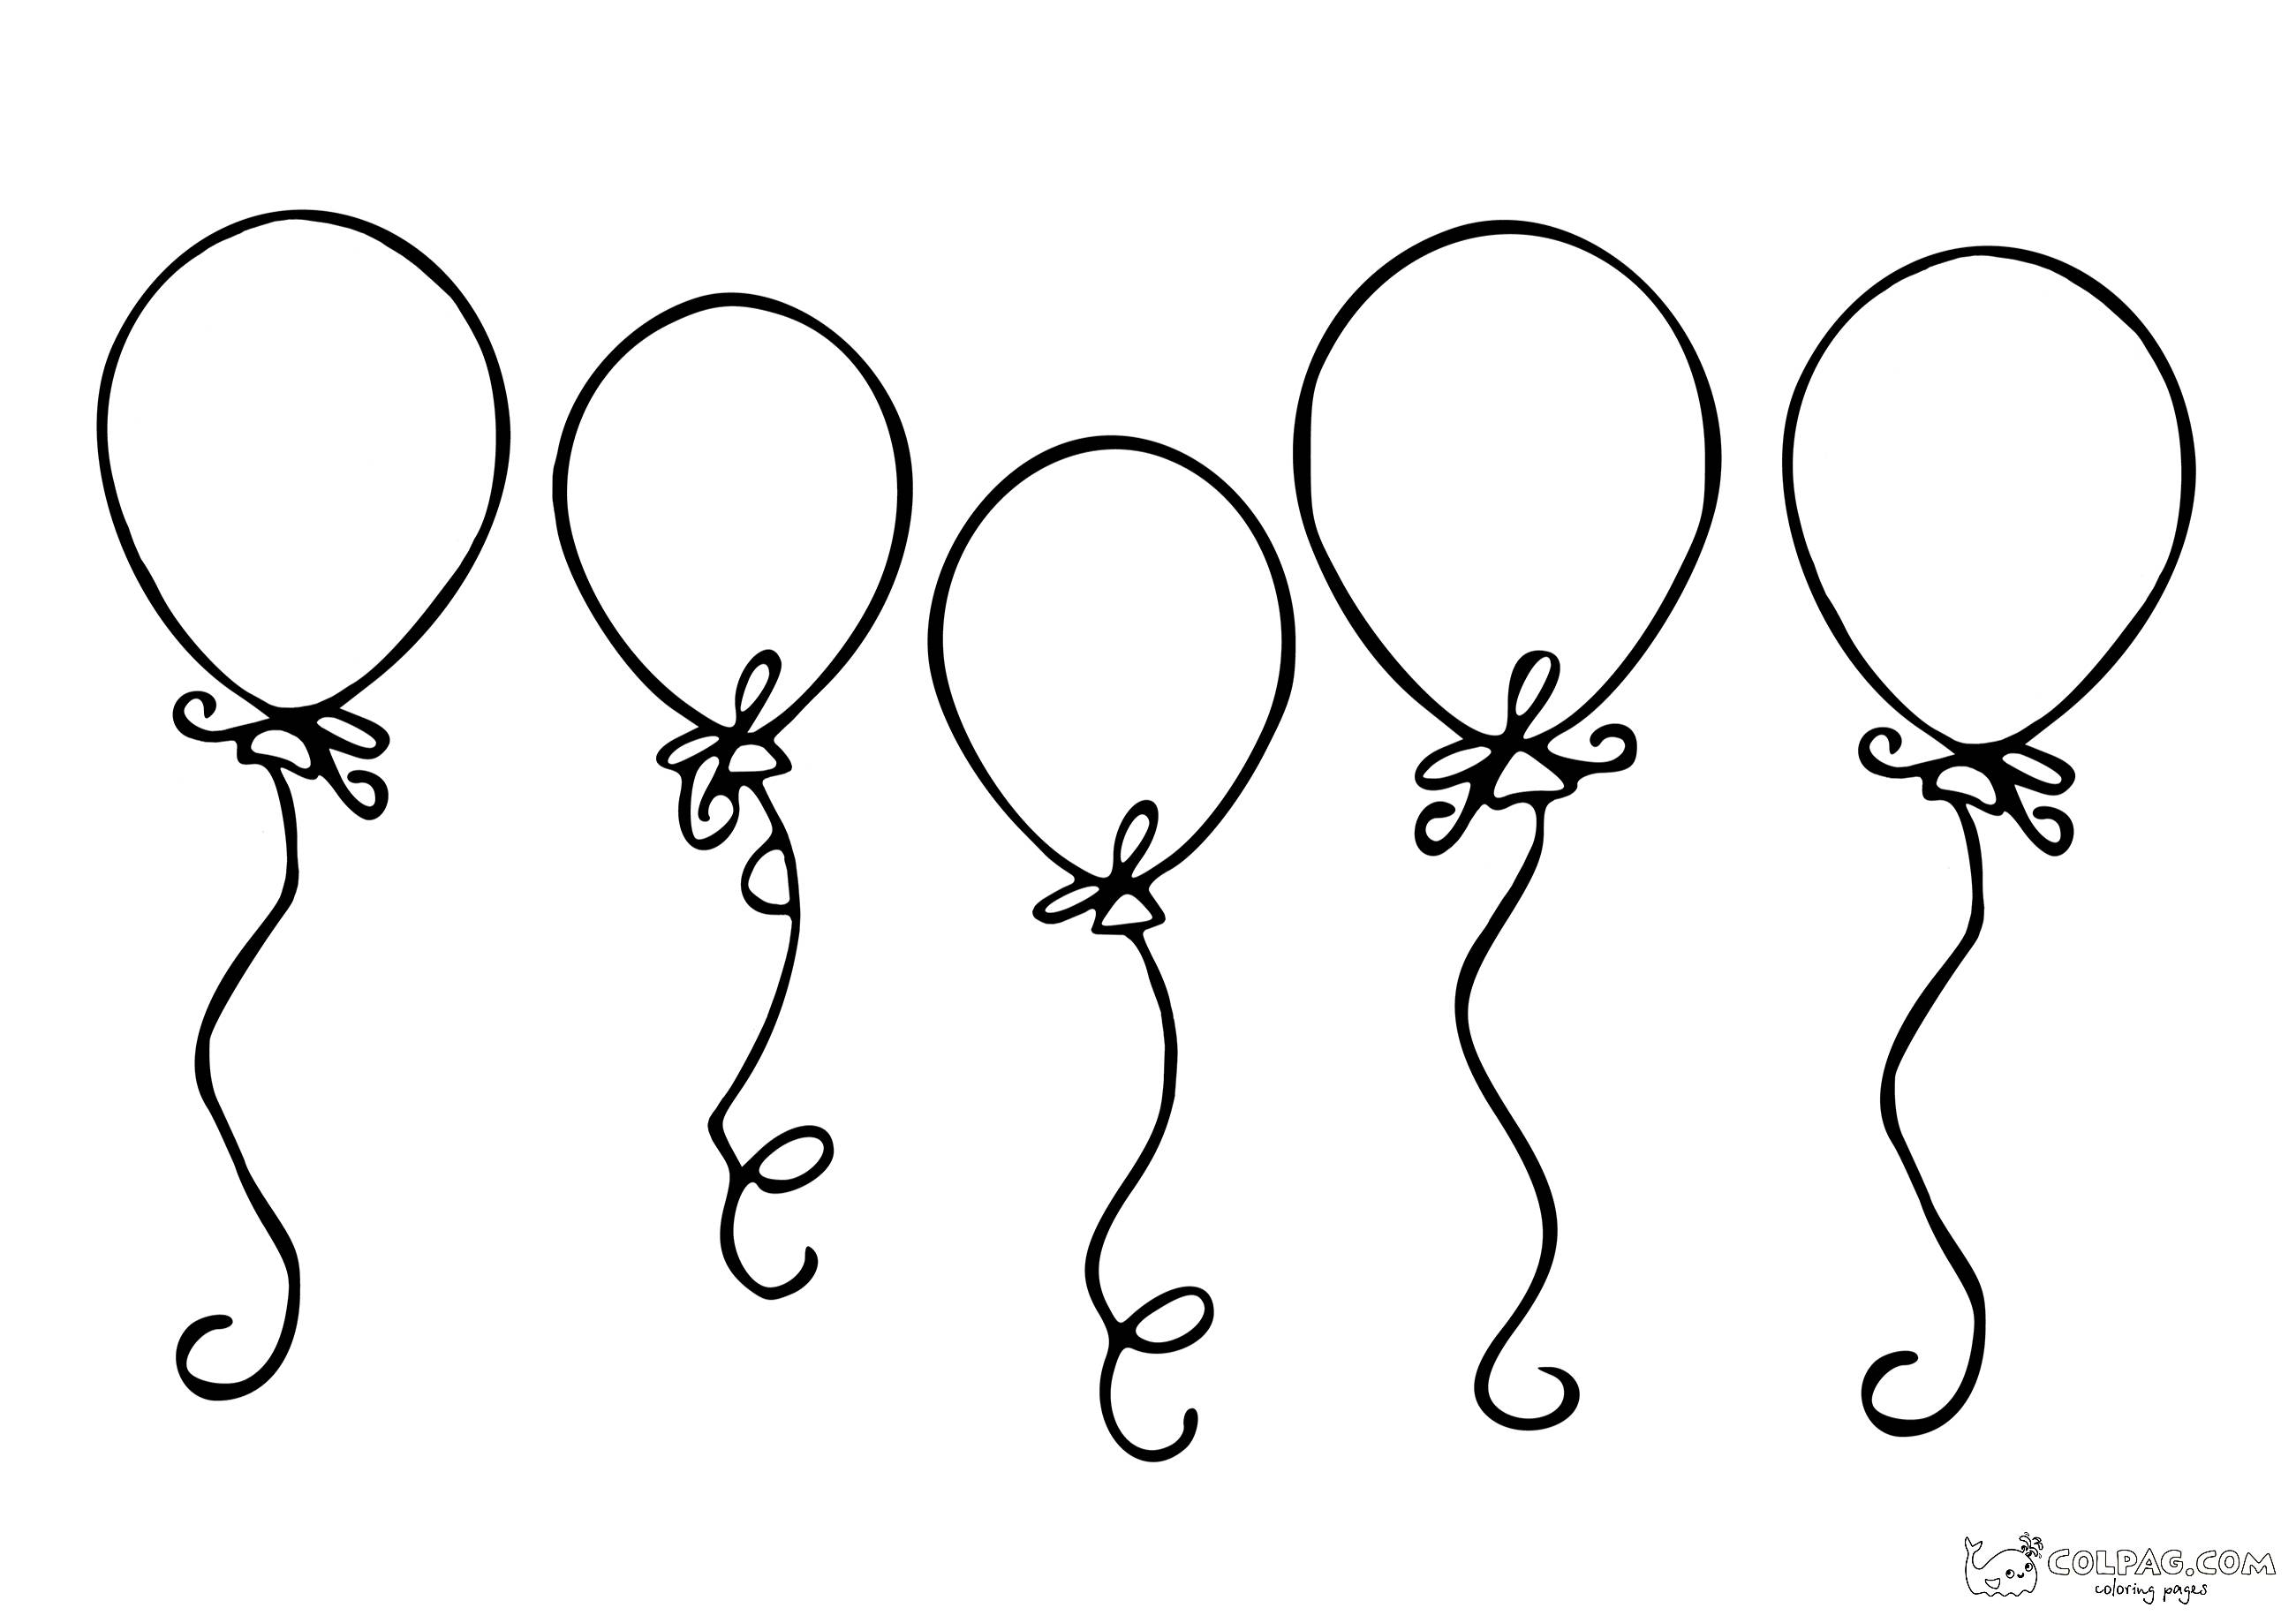 8-five-flying-baloons-coloring-page-colpag-8